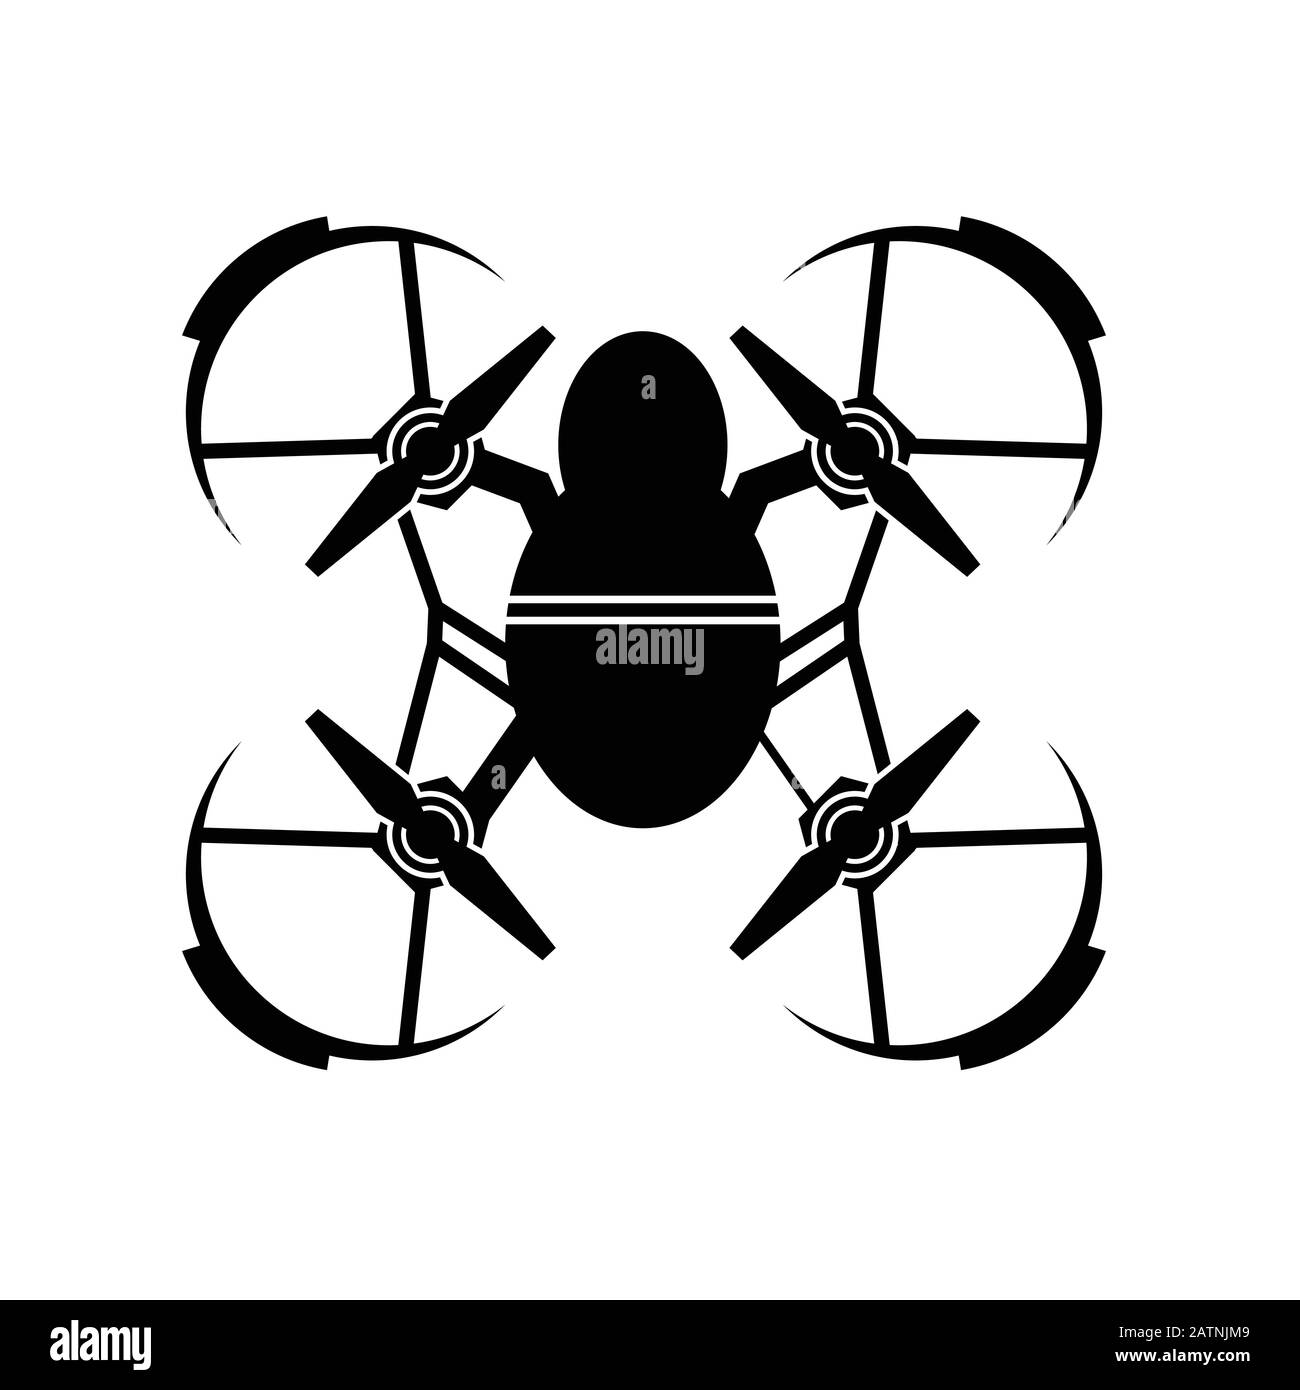 Drone icon sign for logo, website, app, ui. Drone flat vector icon illustration, EPS10 Stock Vector